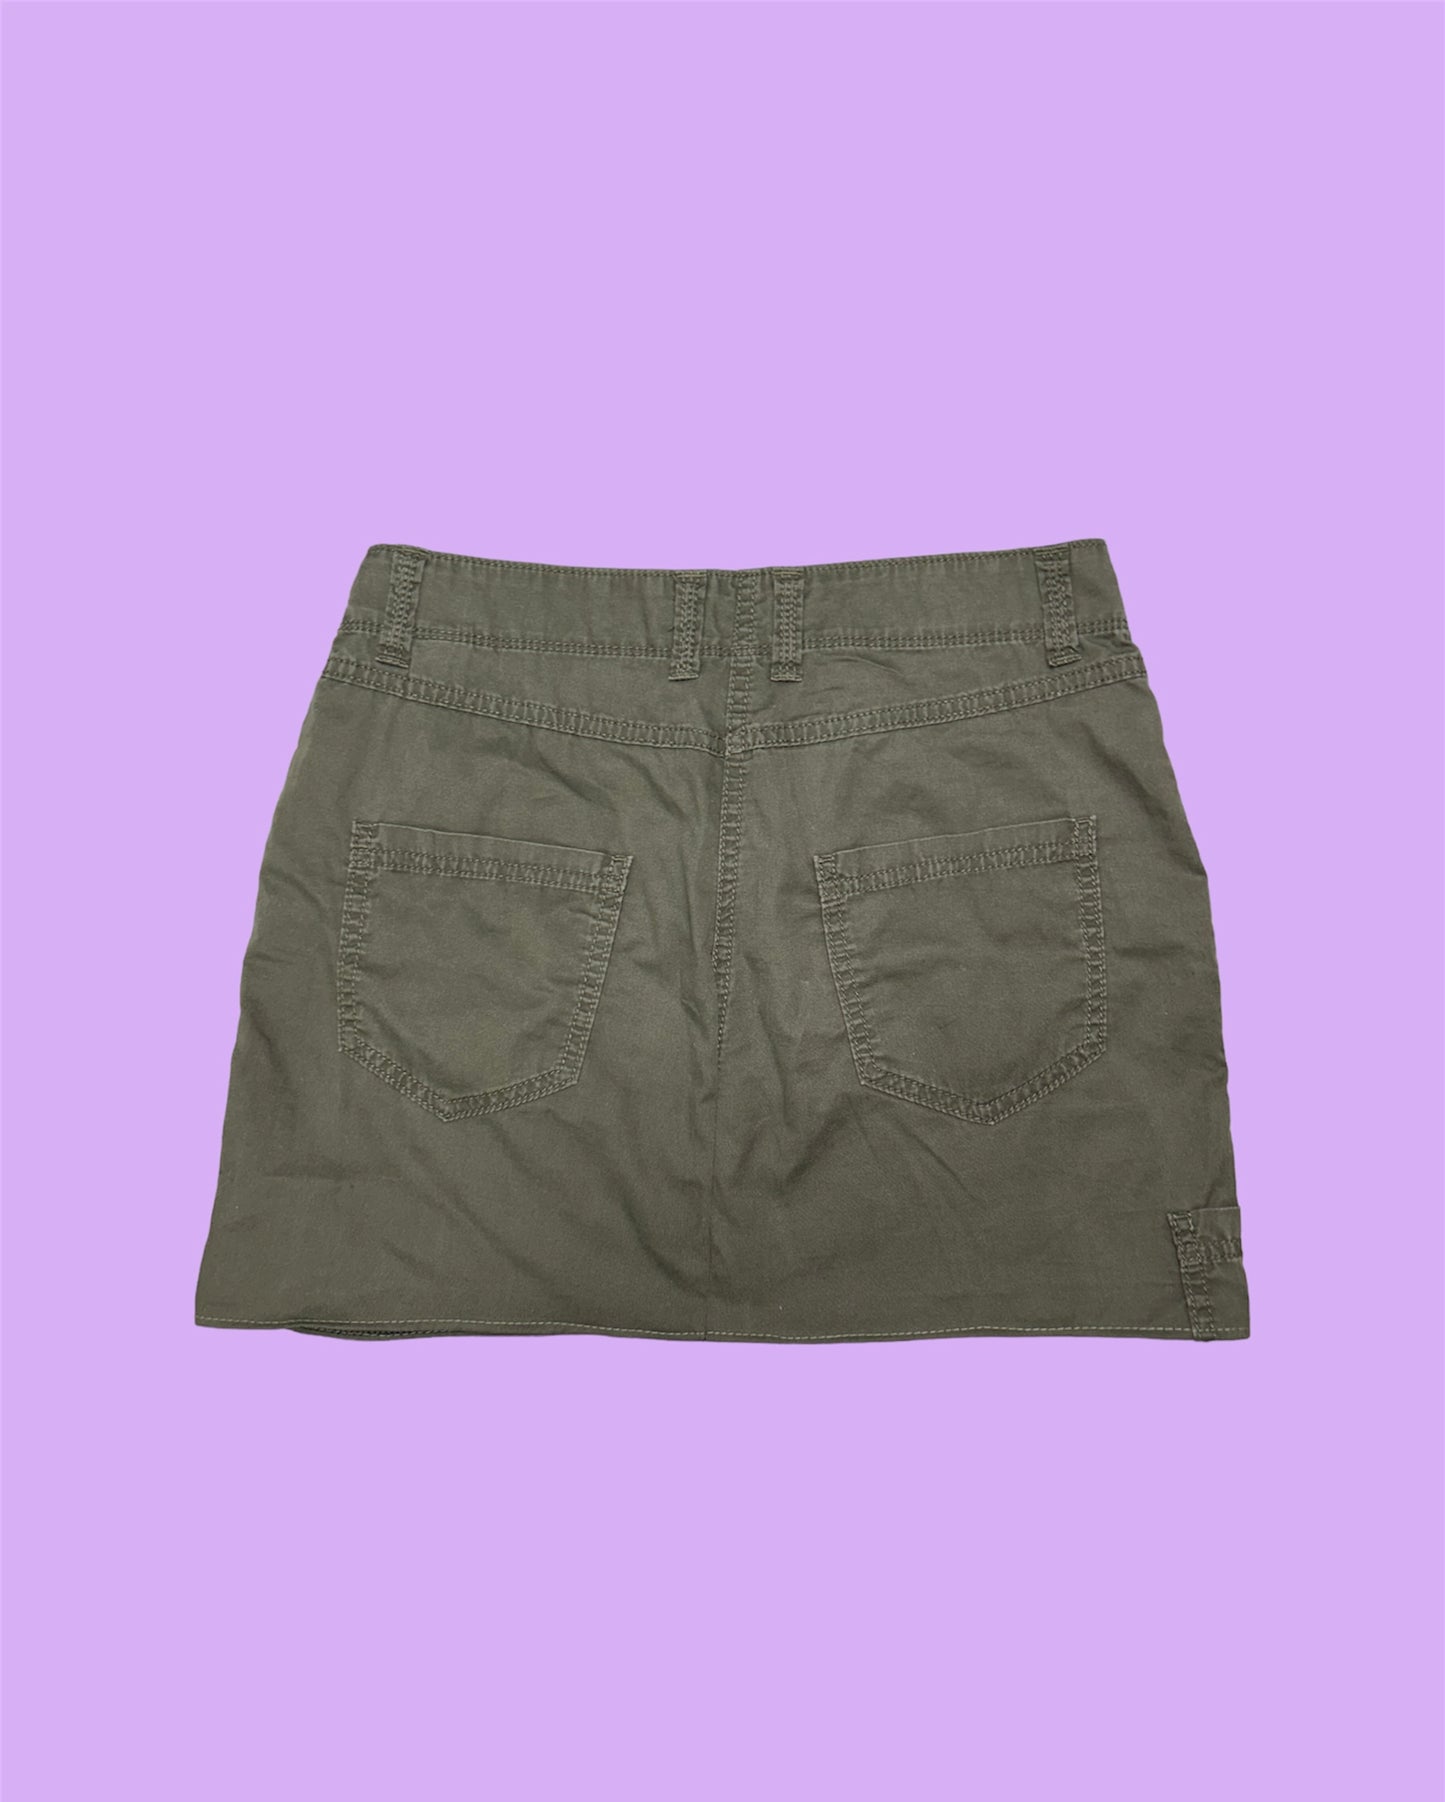 back of khaki brown cargo mini skirt shown on a lilac background